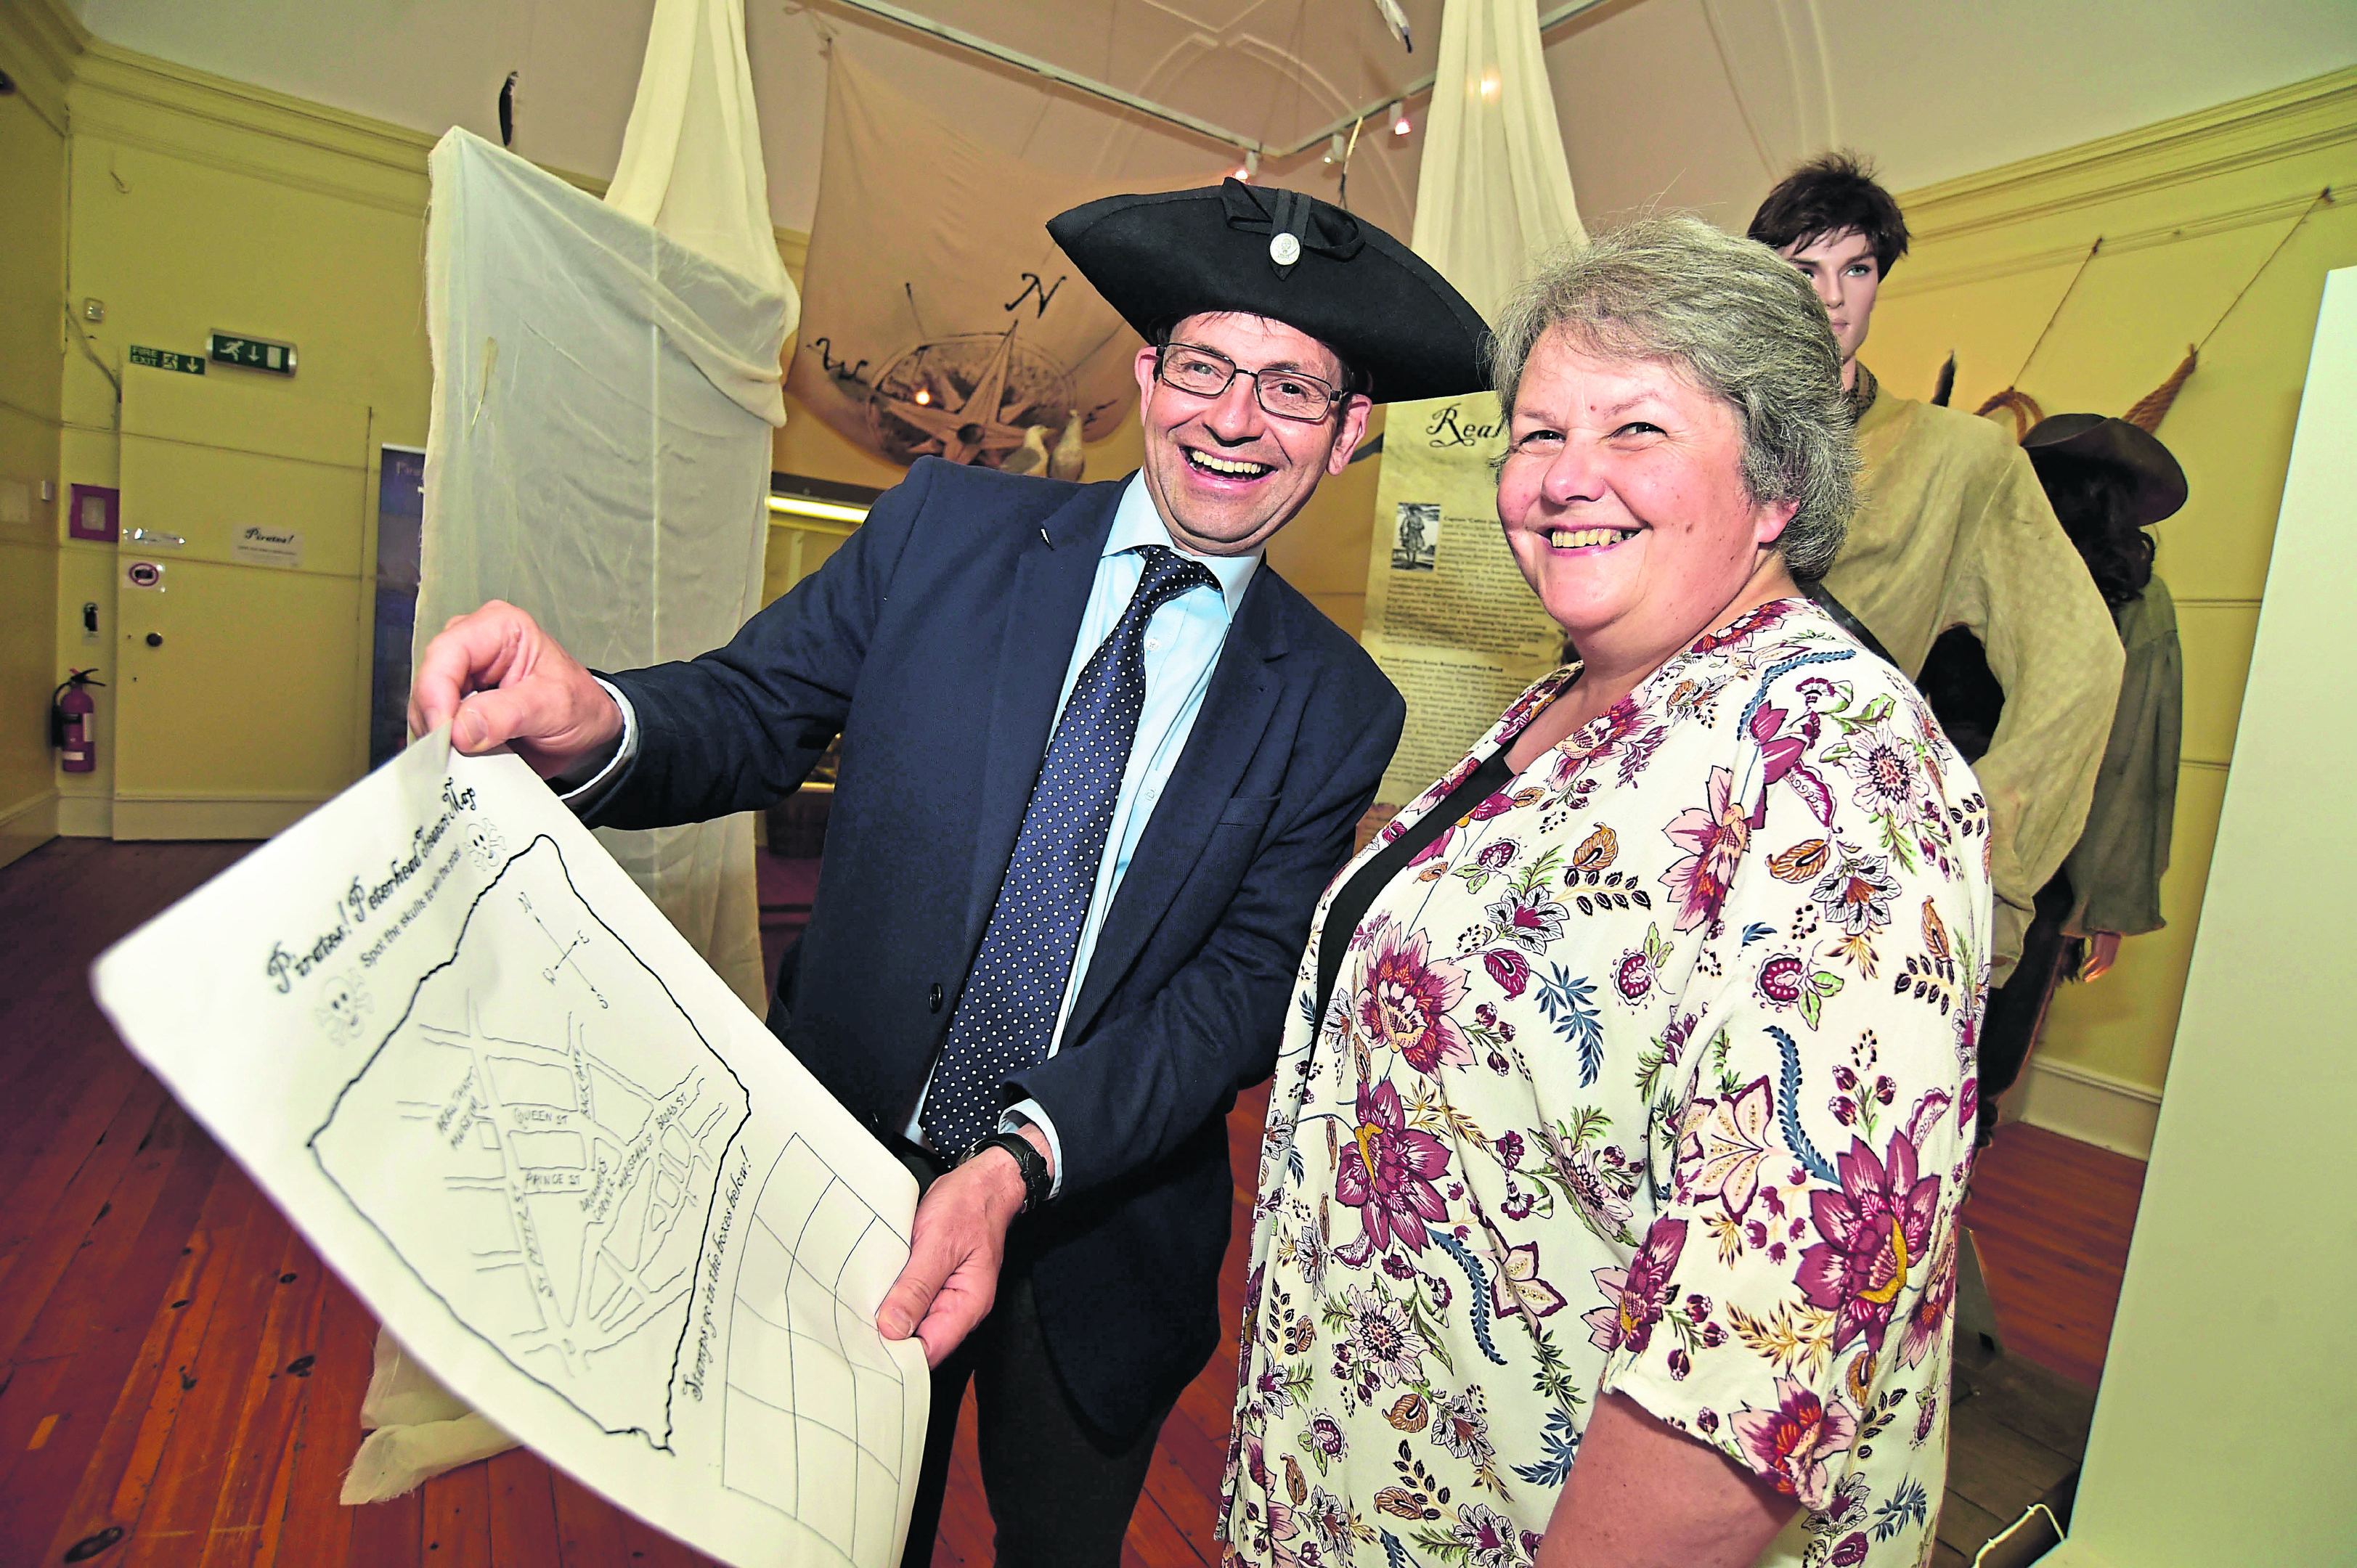 Peterhead Bid manager Ian Sutherland and councillor Anne Stirling with the Peterhead treasure map